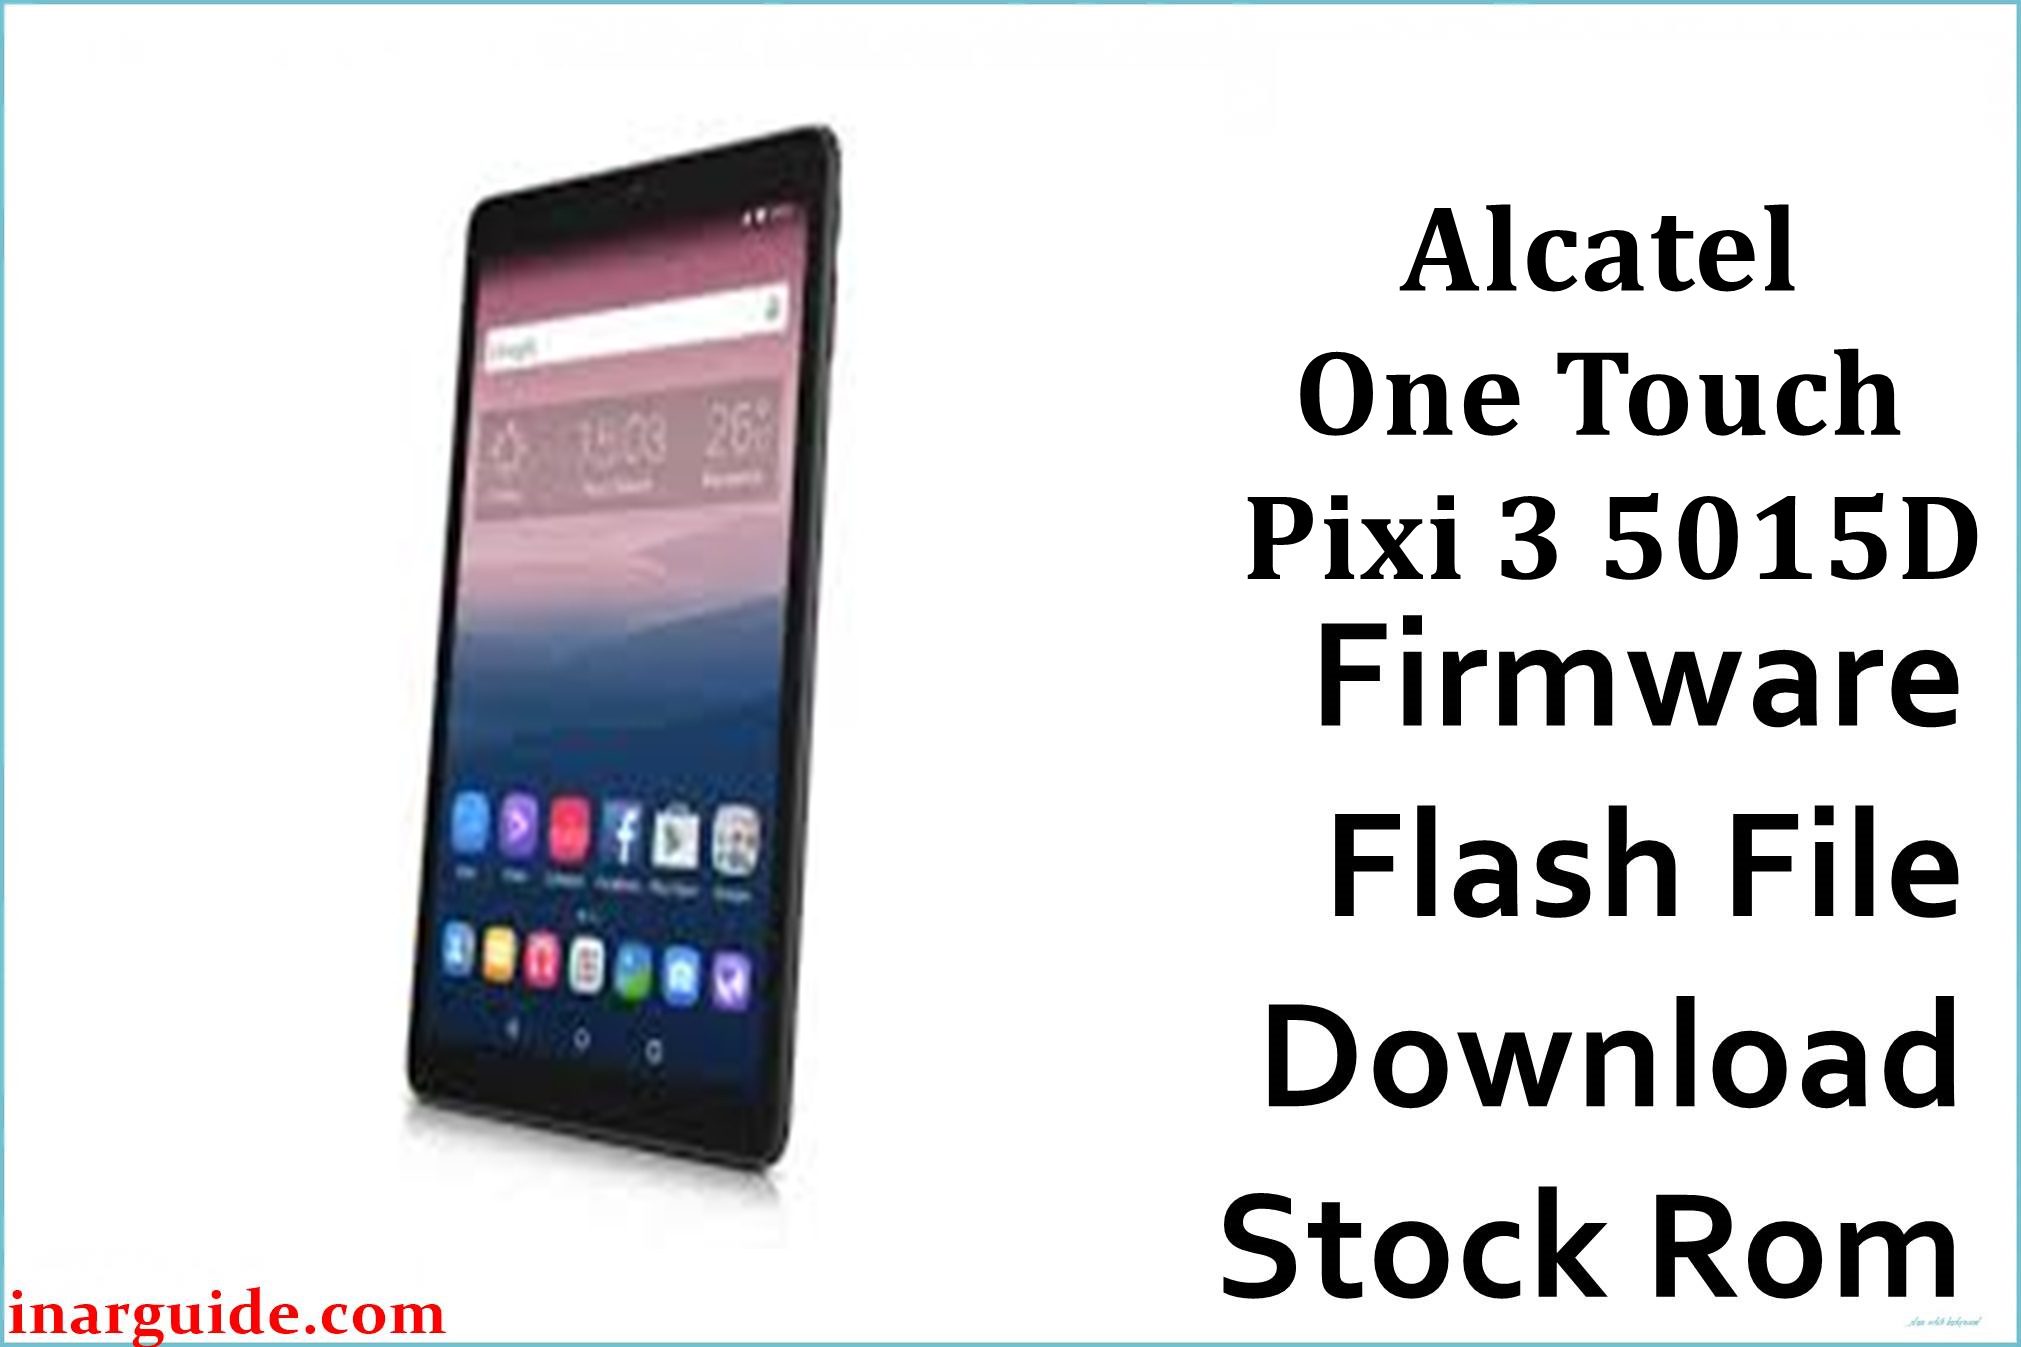 Alcatel One Touch Pixi 3 5015D